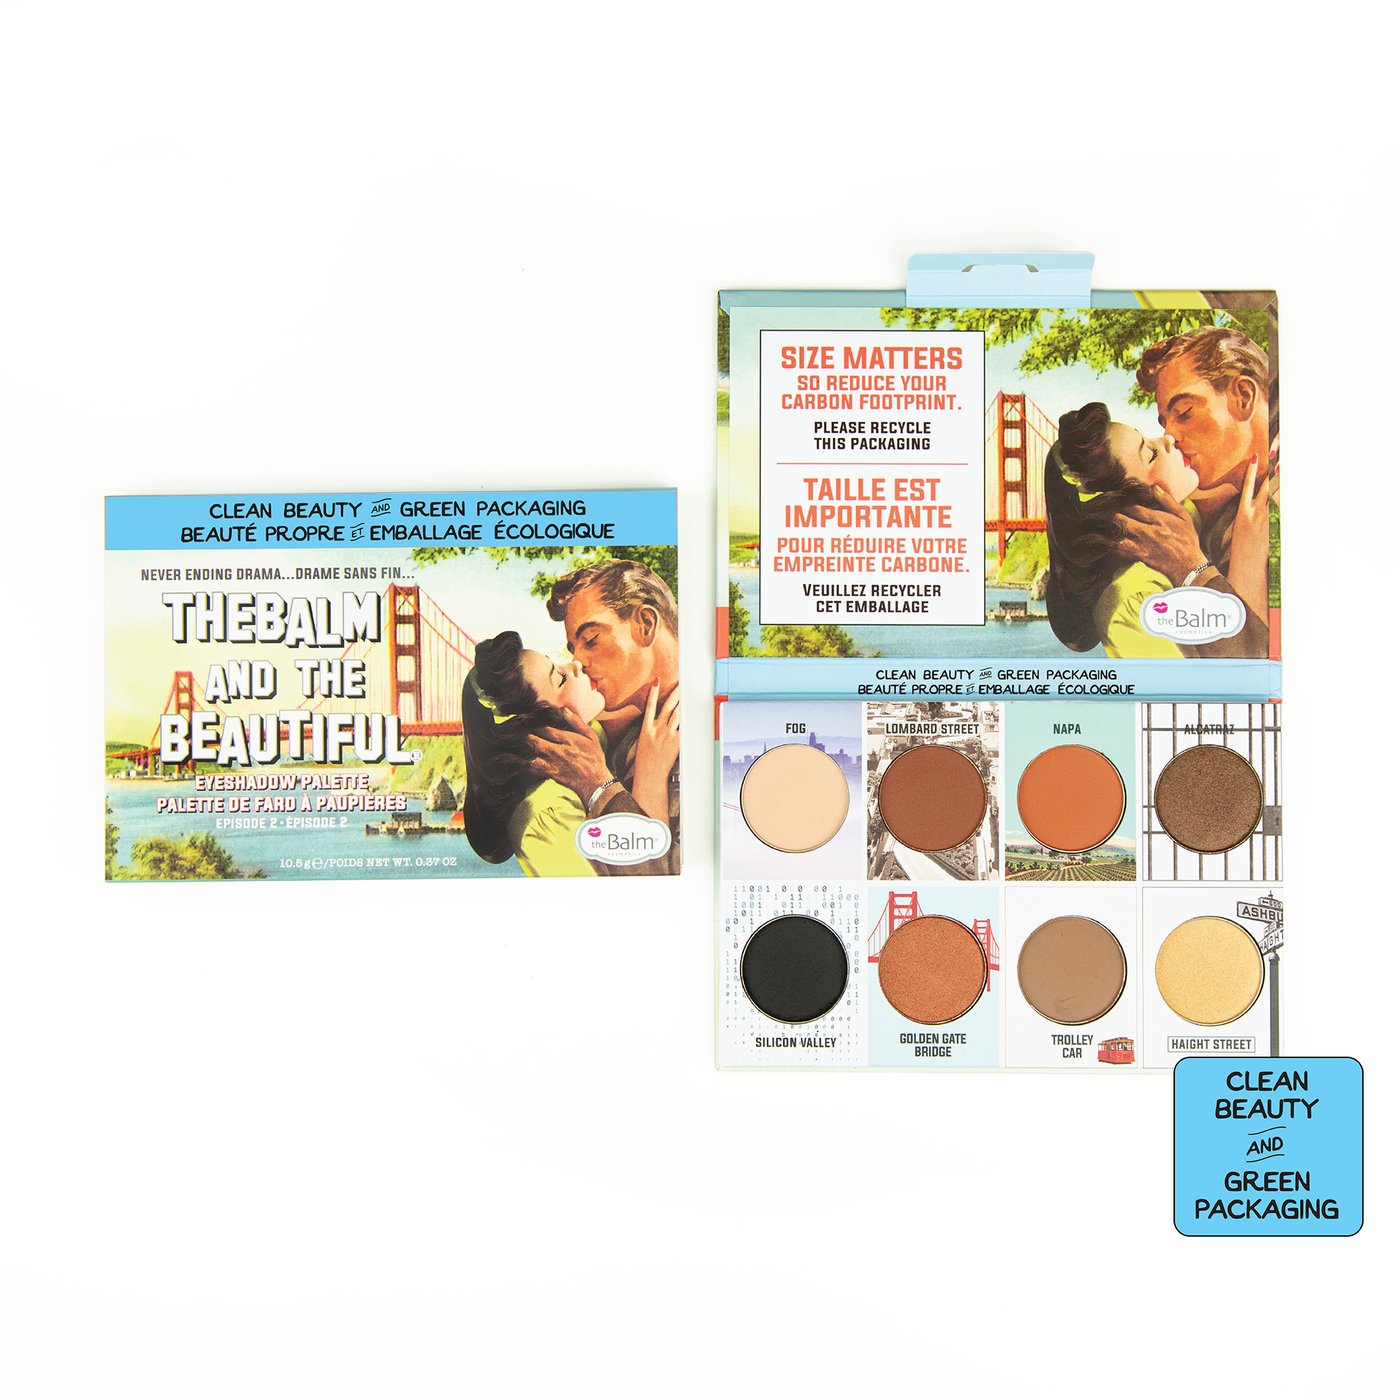 theBalm and the Beautiful Episode 2 Eyeshadow Palette